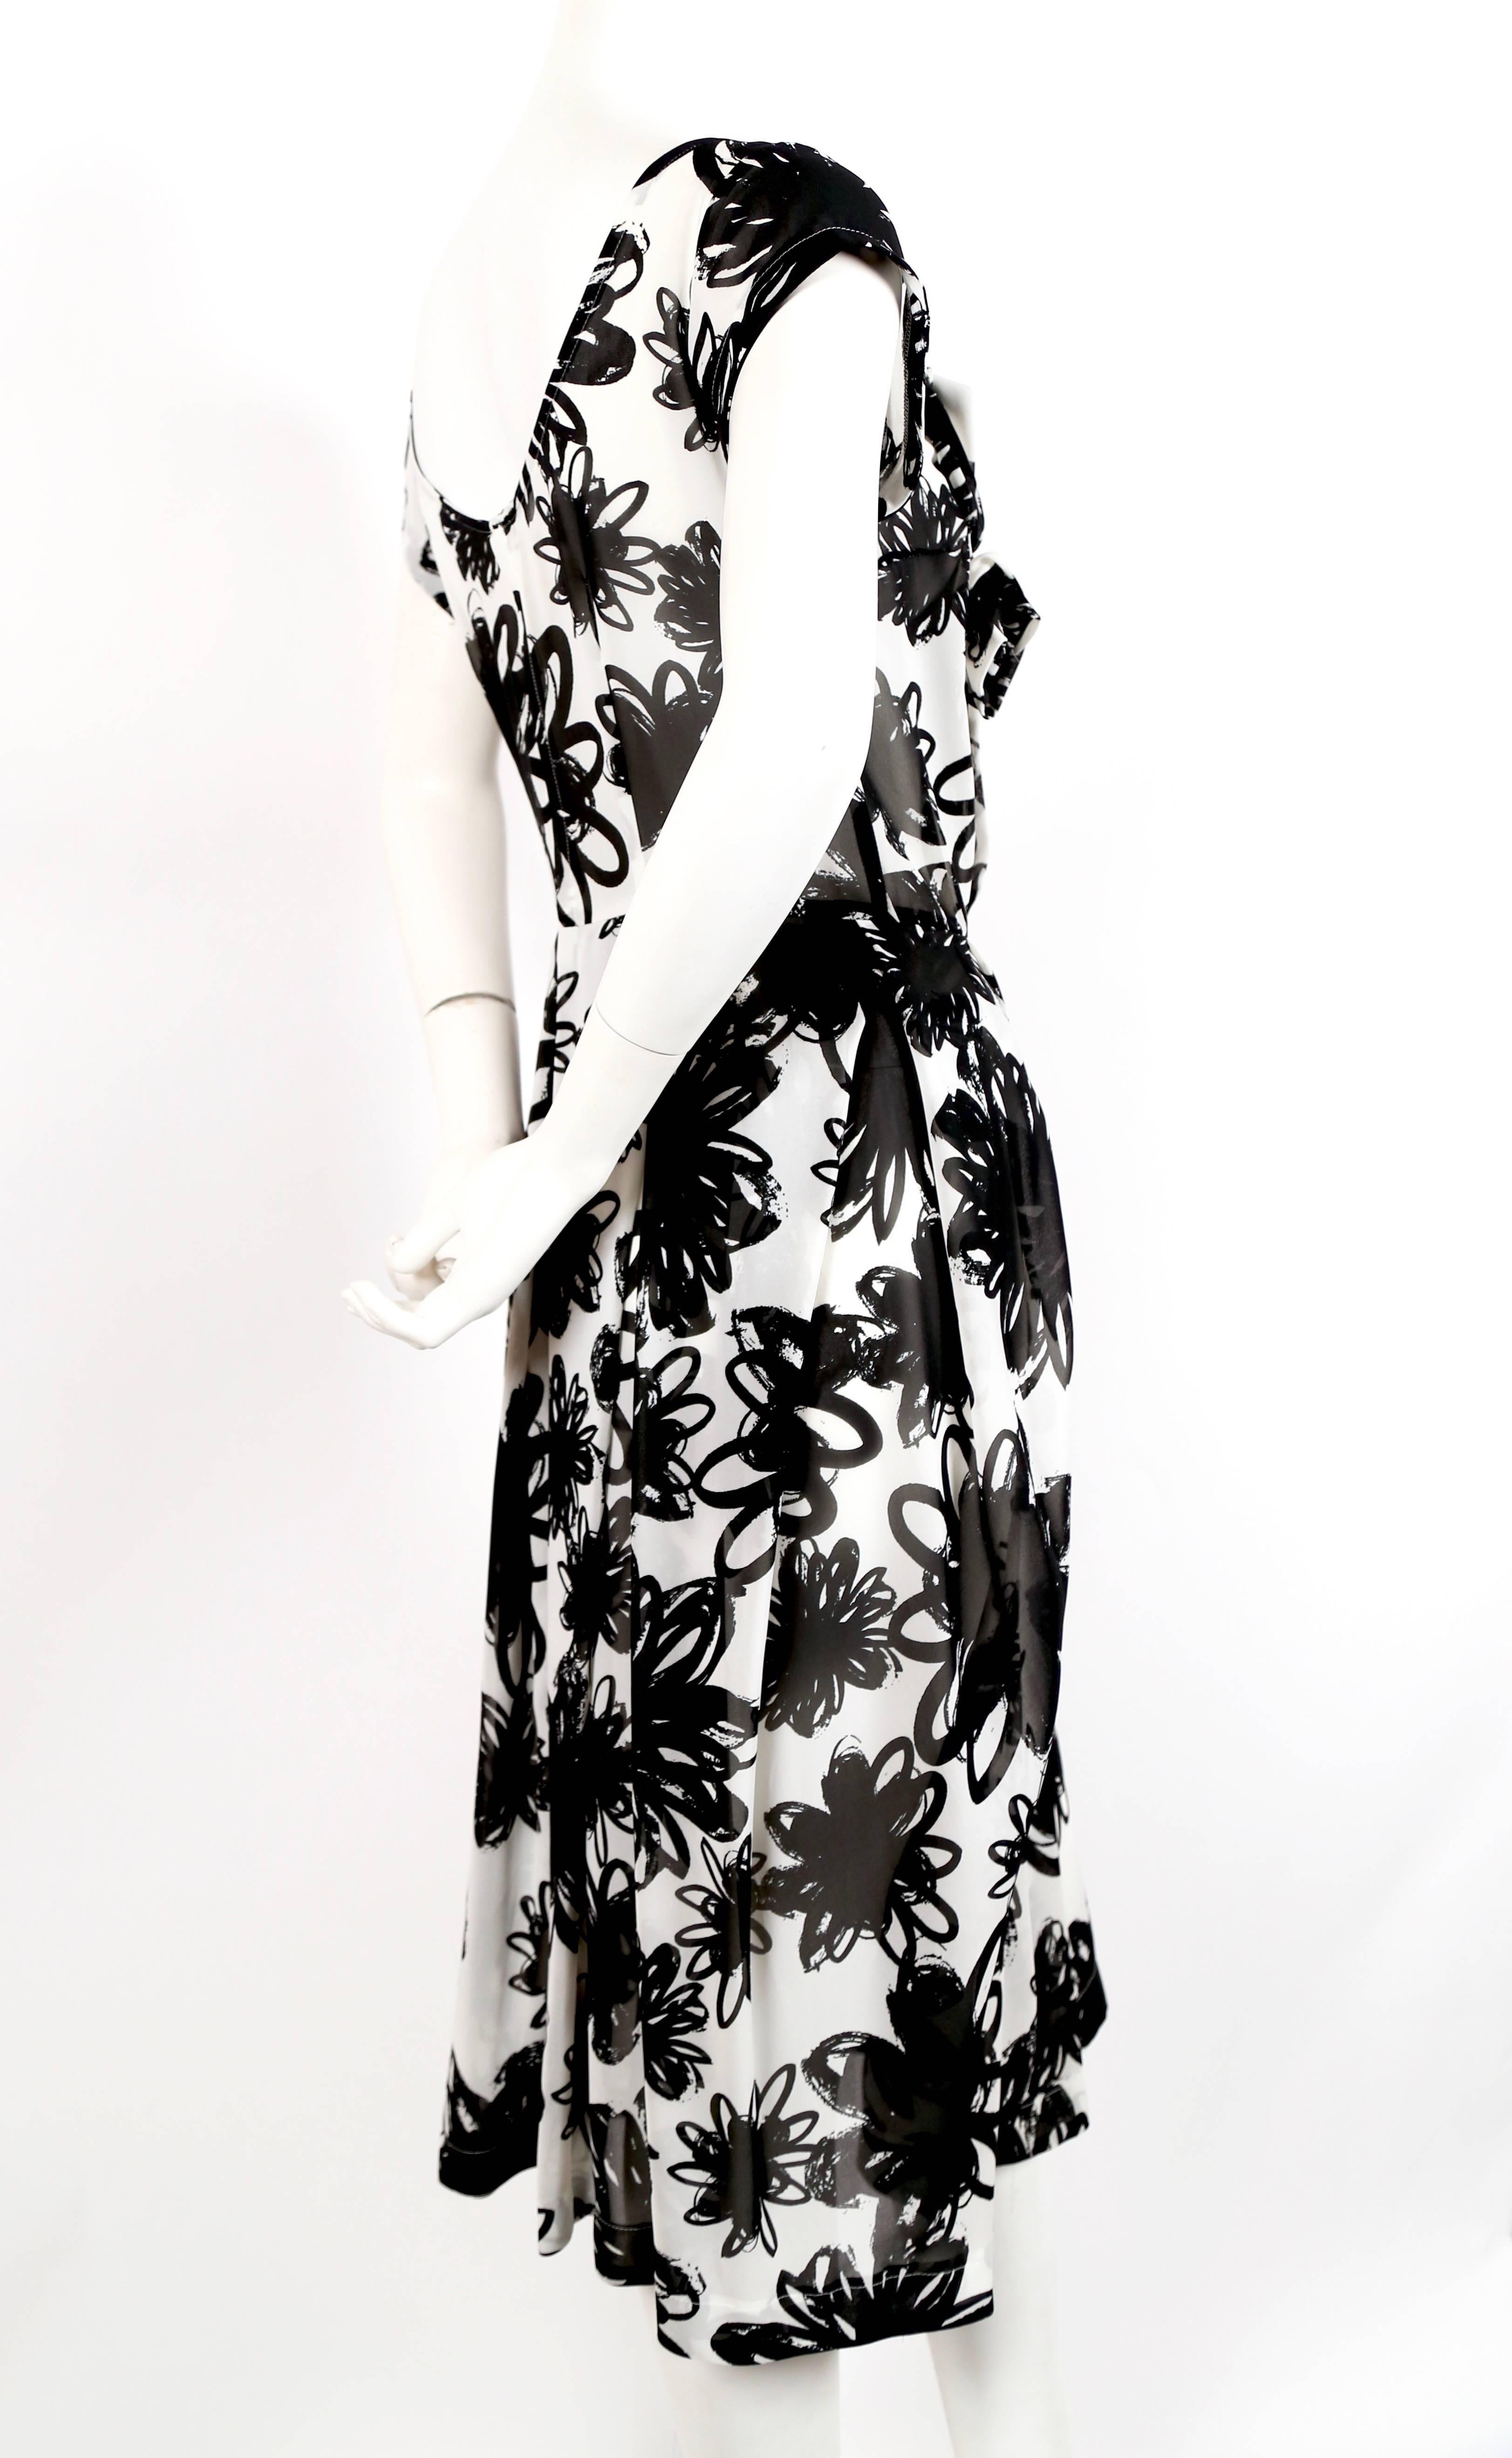 Black and white abstract floral dress with asymmetrically draped neckline and 'flower' accent from Comme Des Garcons. Size 'S'. Approximate measurements: shoulder 15", bust 35", waist 32" and length 46". Fabric is very